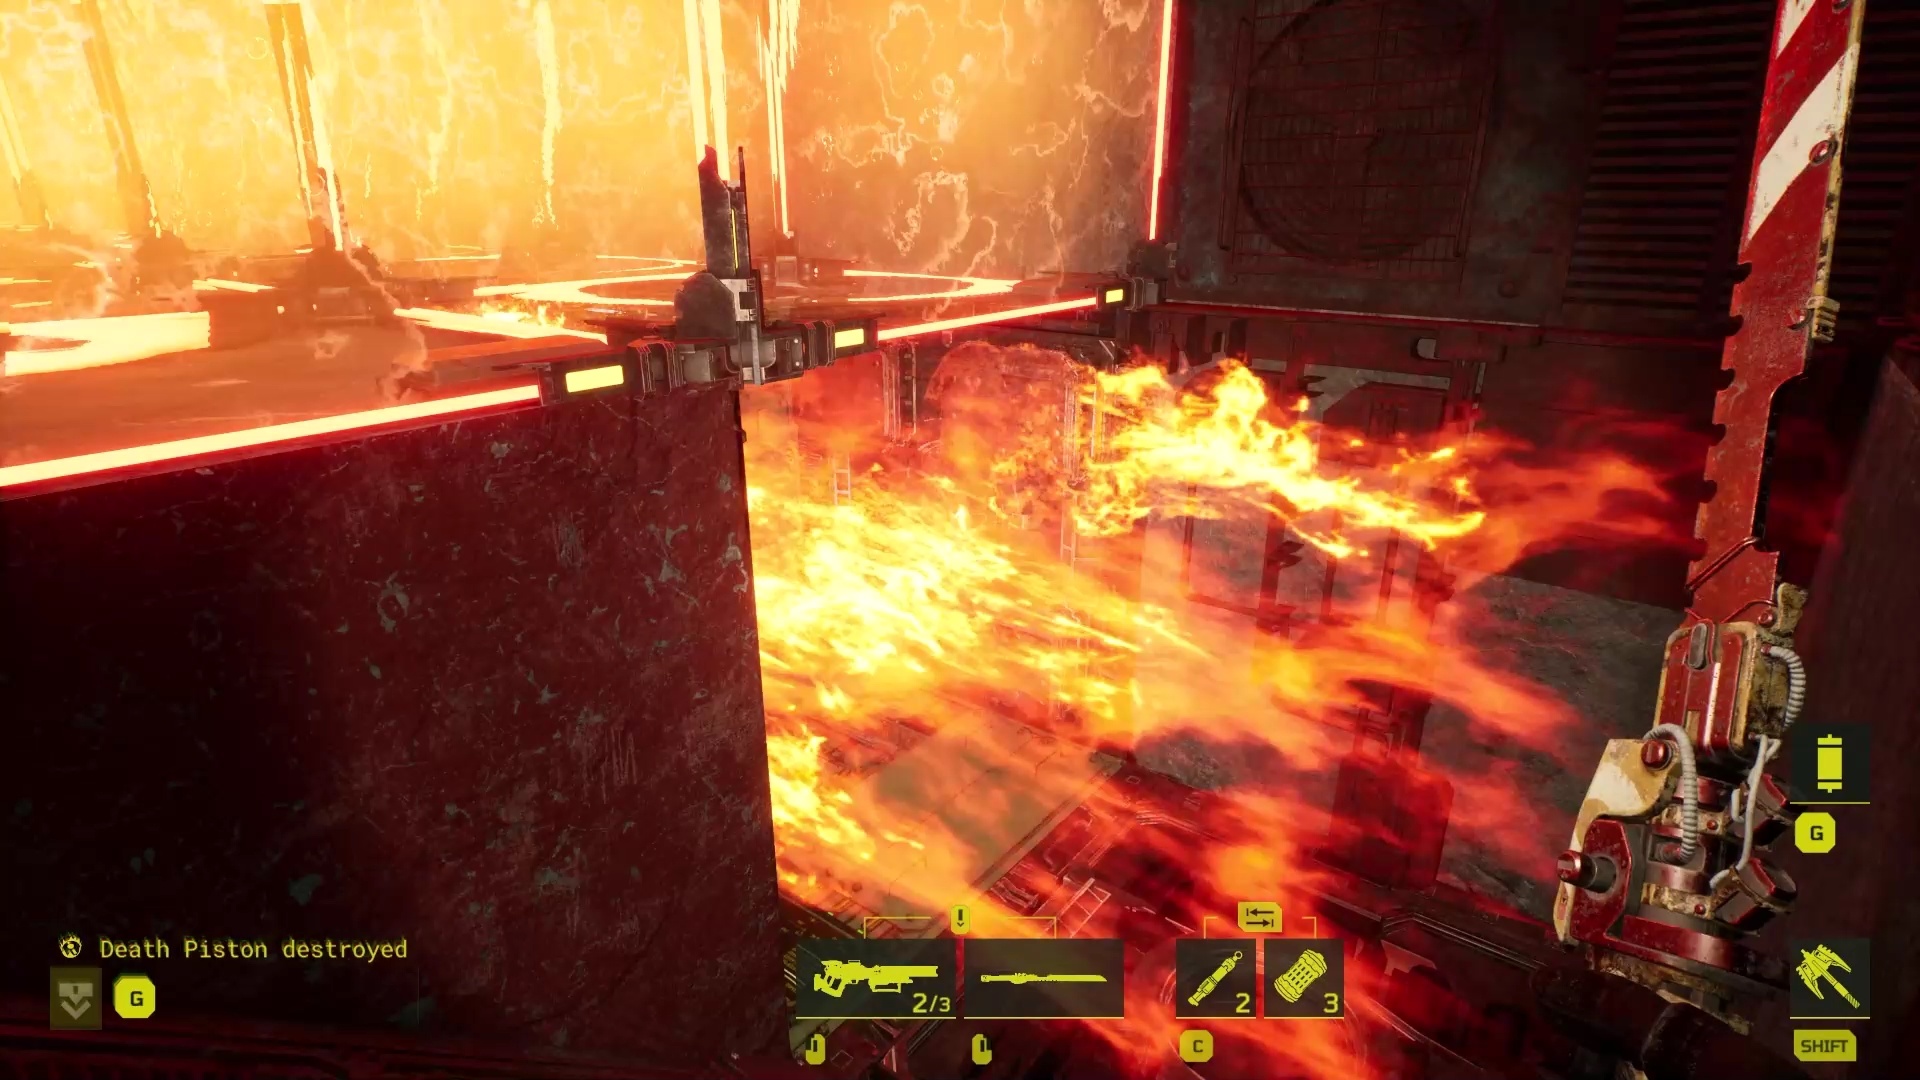 (A treacherously placed flamethrower trap triggers, we just manage to dodge to the side via Dash.)